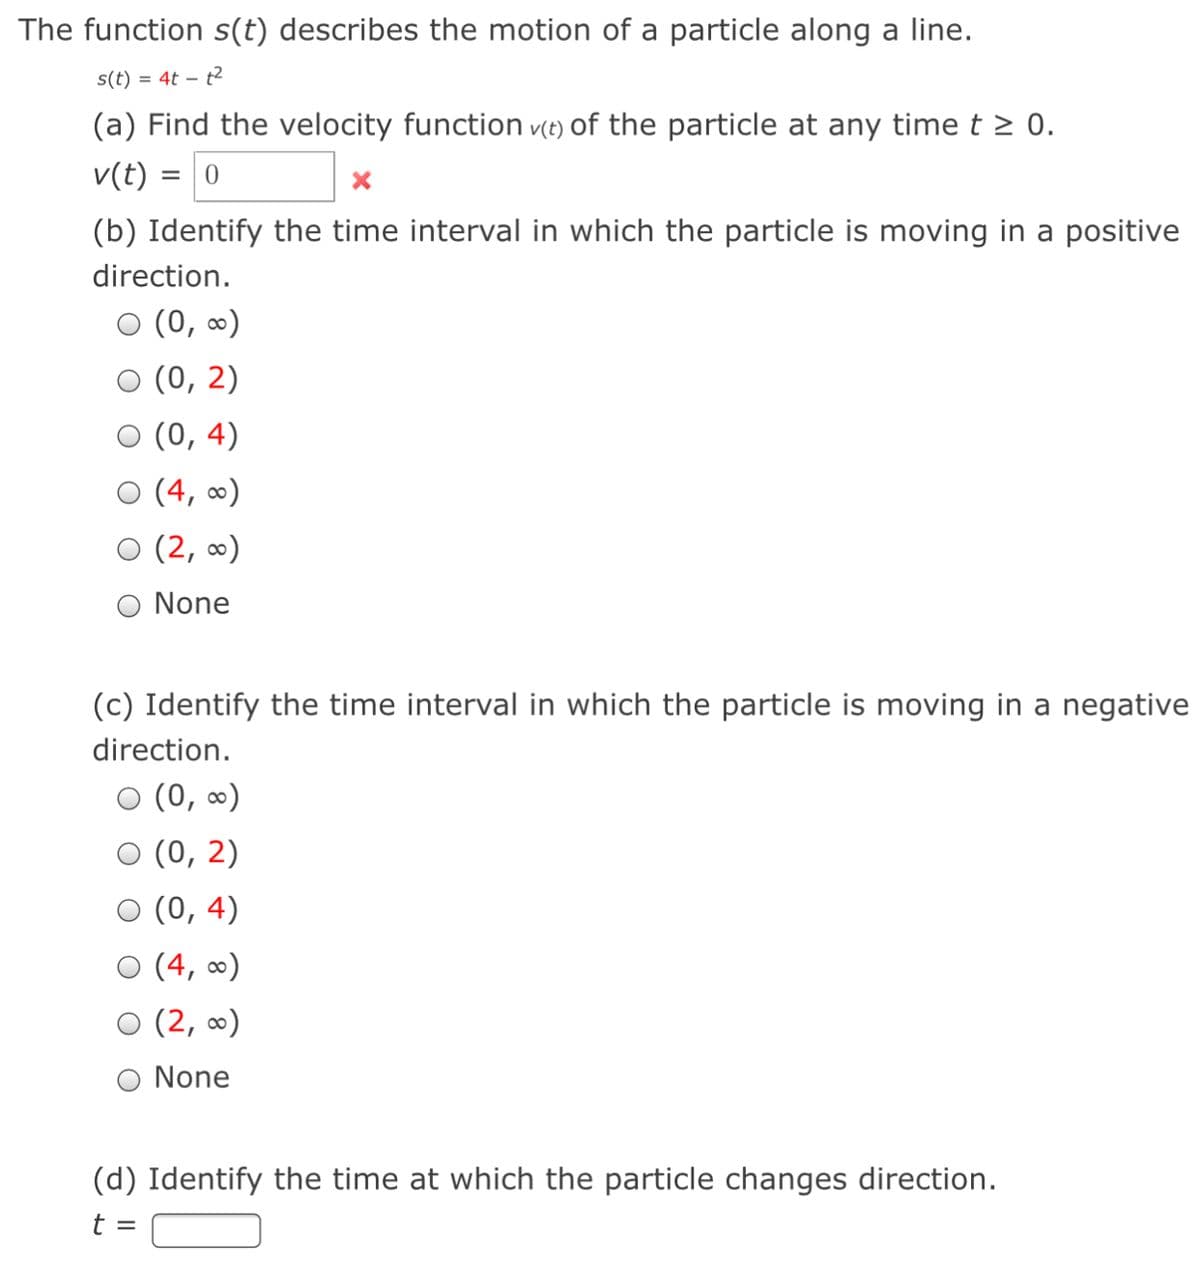 The function s(t) describes the motion of a particle along a line.
s(t) = 4t – t2
(a) Find the velocity function v(t) of the particle at any timet > 0.
v(t) = 0
(b) Identify the time interval in which the particle is moving in a positive
direction.
O (0, ∞)
(0, 2)
О (0, 4)
O (4,
(2, 0)
None
(c) Identify the time interval in which the particle is moving in a negative
direction.
(0, 0)
O (0, 2)
О (0, 4)
O (4,
0)
(2, 0)
O None
(d) Identify the time at which the particle changes direction.
t =
